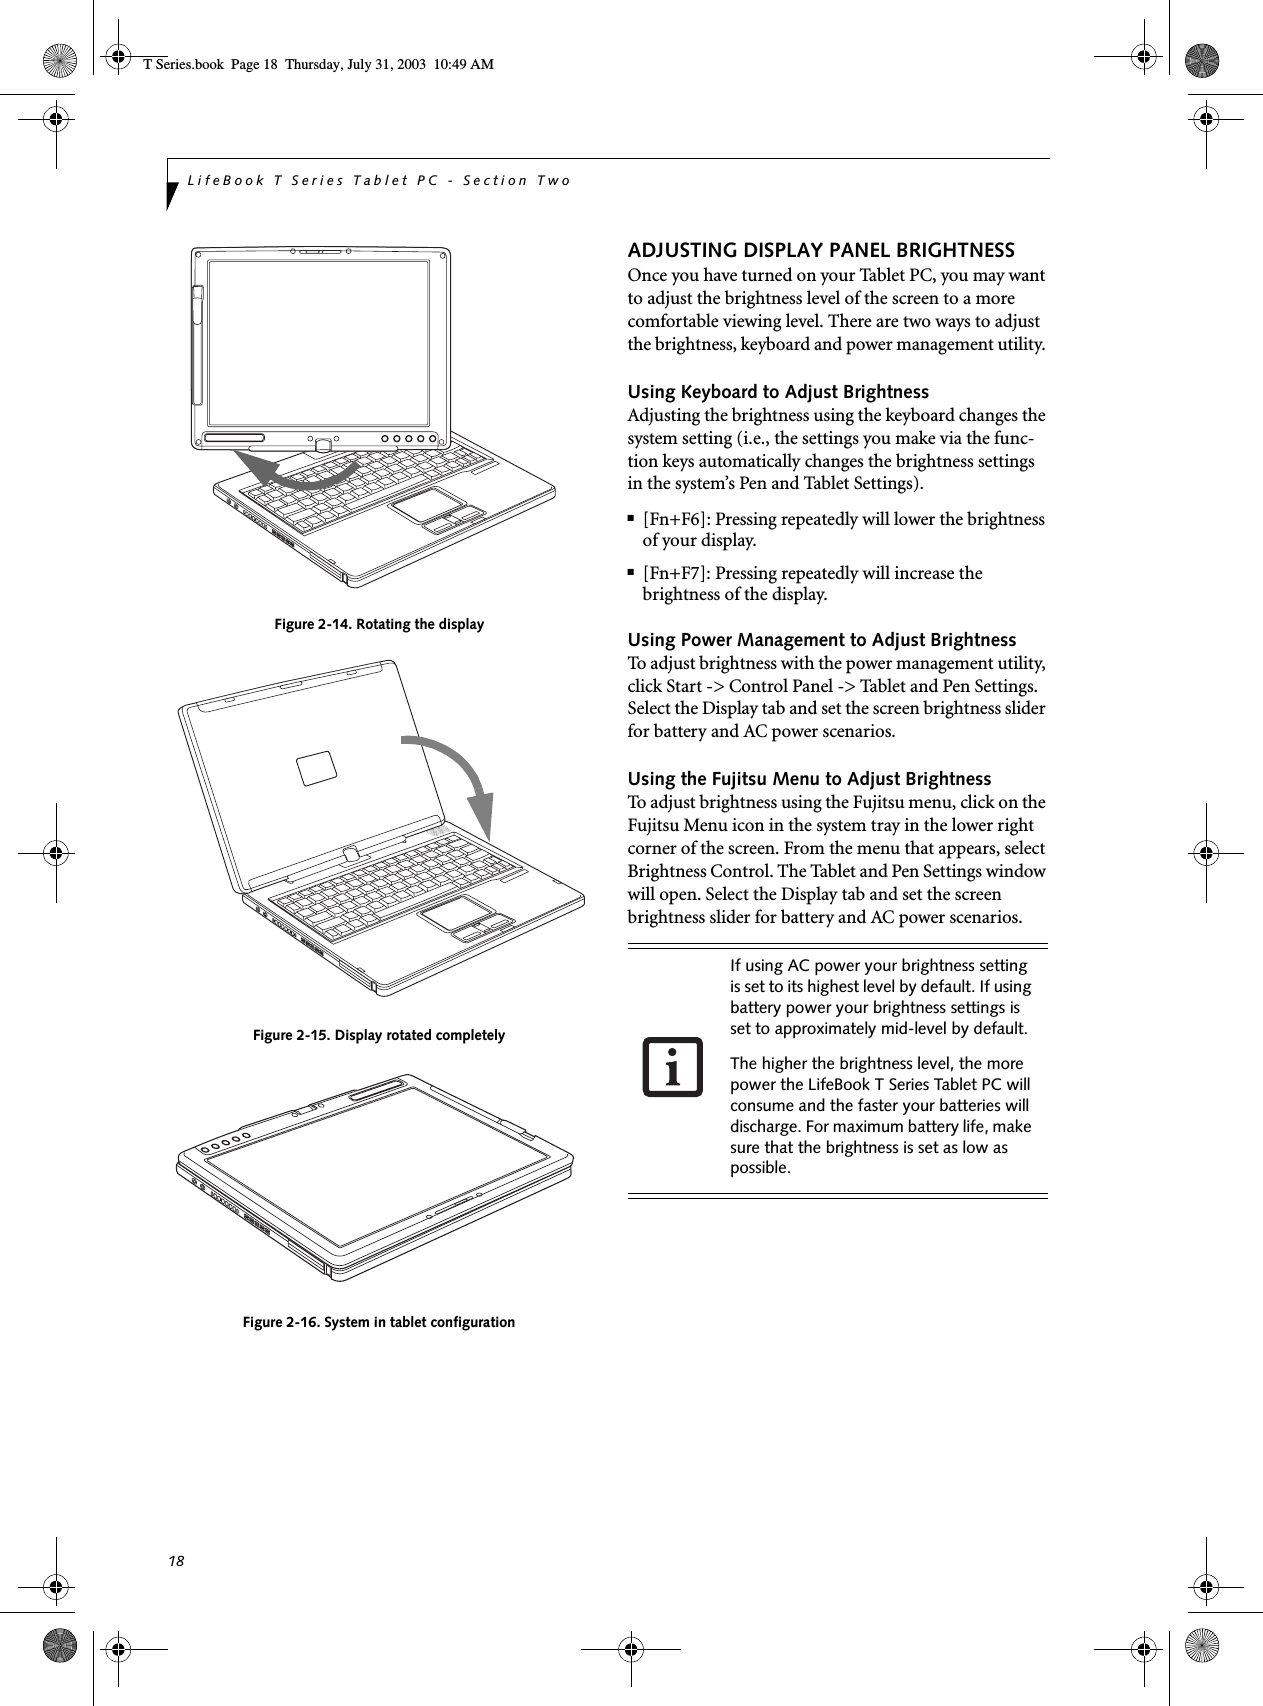 18LifeBook T Series Tablet PC - Section TwoFigure 2-14. Rotating the displayFigure 2-15. Display rotated completelyFigure 2-16. System in tablet configurationADJUSTING DISPLAY PANEL BRIGHTNESSOnce you have turned on your Tablet PC, you may want to adjust the brightness level of the screen to a more comfortable viewing level. There are two ways to adjust the brightness, keyboard and power management utility. Using Keyboard to Adjust BrightnessAdjusting the brightness using the keyboard changes the system setting (i.e., the settings you make via the func-tion keys automatically changes the brightness settings in the system’s Pen and Tablet Settings). ■[Fn+F6]: Pressing repeatedly will lower the brightness of your display.■[Fn+F7]: Pressing repeatedly will increase thebrightness of the display.Using Power Management to Adjust BrightnessTo adjust brightness with the power management utility, click Start -&gt; Control Panel -&gt; Tablet and Pen Settings. Select the Display tab and set the screen brightness slider for battery and AC power scenarios.Using the Fujitsu Menu to Adjust BrightnessTo adjust brightness using the Fujitsu menu, click on the Fujitsu Menu icon in the system tray in the lower right corner of the screen. From the menu that appears, select Brightness Control. The Tablet and Pen Settings window will open. Select the Display tab and set the screen brightness slider for battery and AC power scenarios.  If using AC power your brightness setting is set to its highest level by default. If using battery power your brightness settings is set to approximately mid-level by default.The higher the brightness level, the more power the LifeBook T Series Tablet PC will consume and the faster your batteries will discharge. For maximum battery life, make sure that the brightness is set as low as possible.T Series.book  Page 18  Thursday, July 31, 2003  10:49 AM